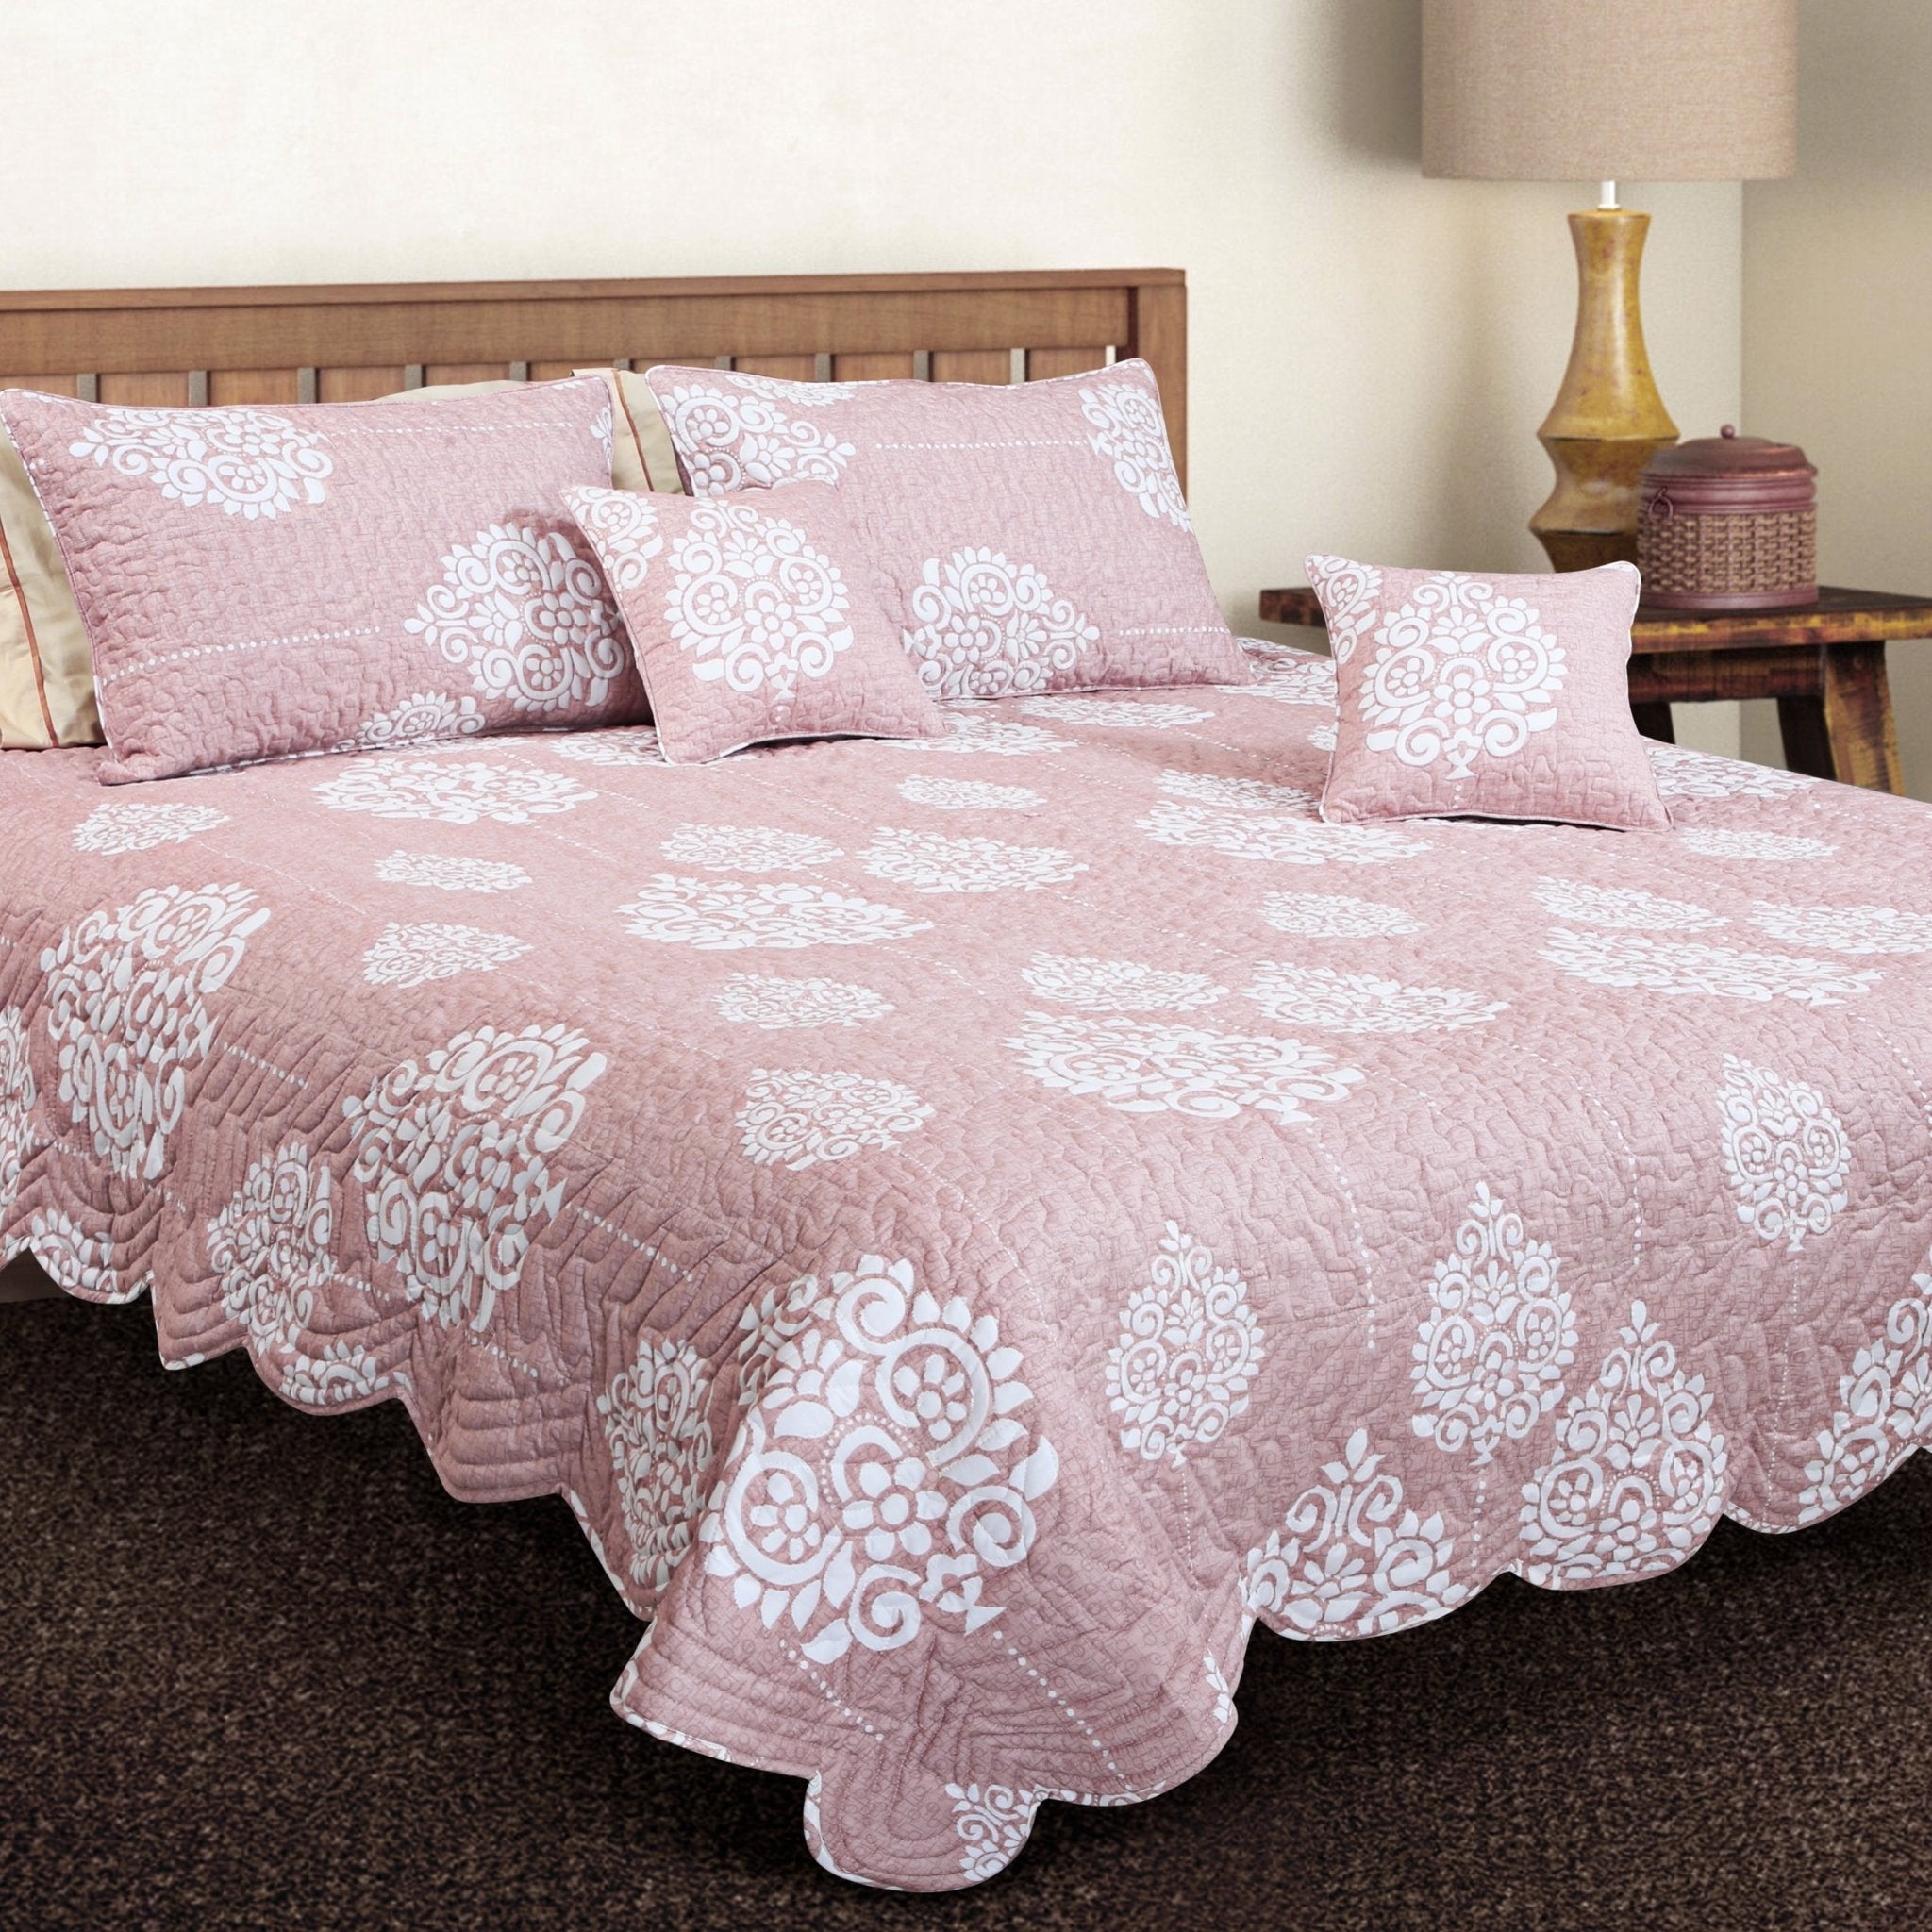 Petal Soft 100% Cotton Peach Pink Ethnic King Size 5 Piece Quilted Bedspread Set - MALAKO